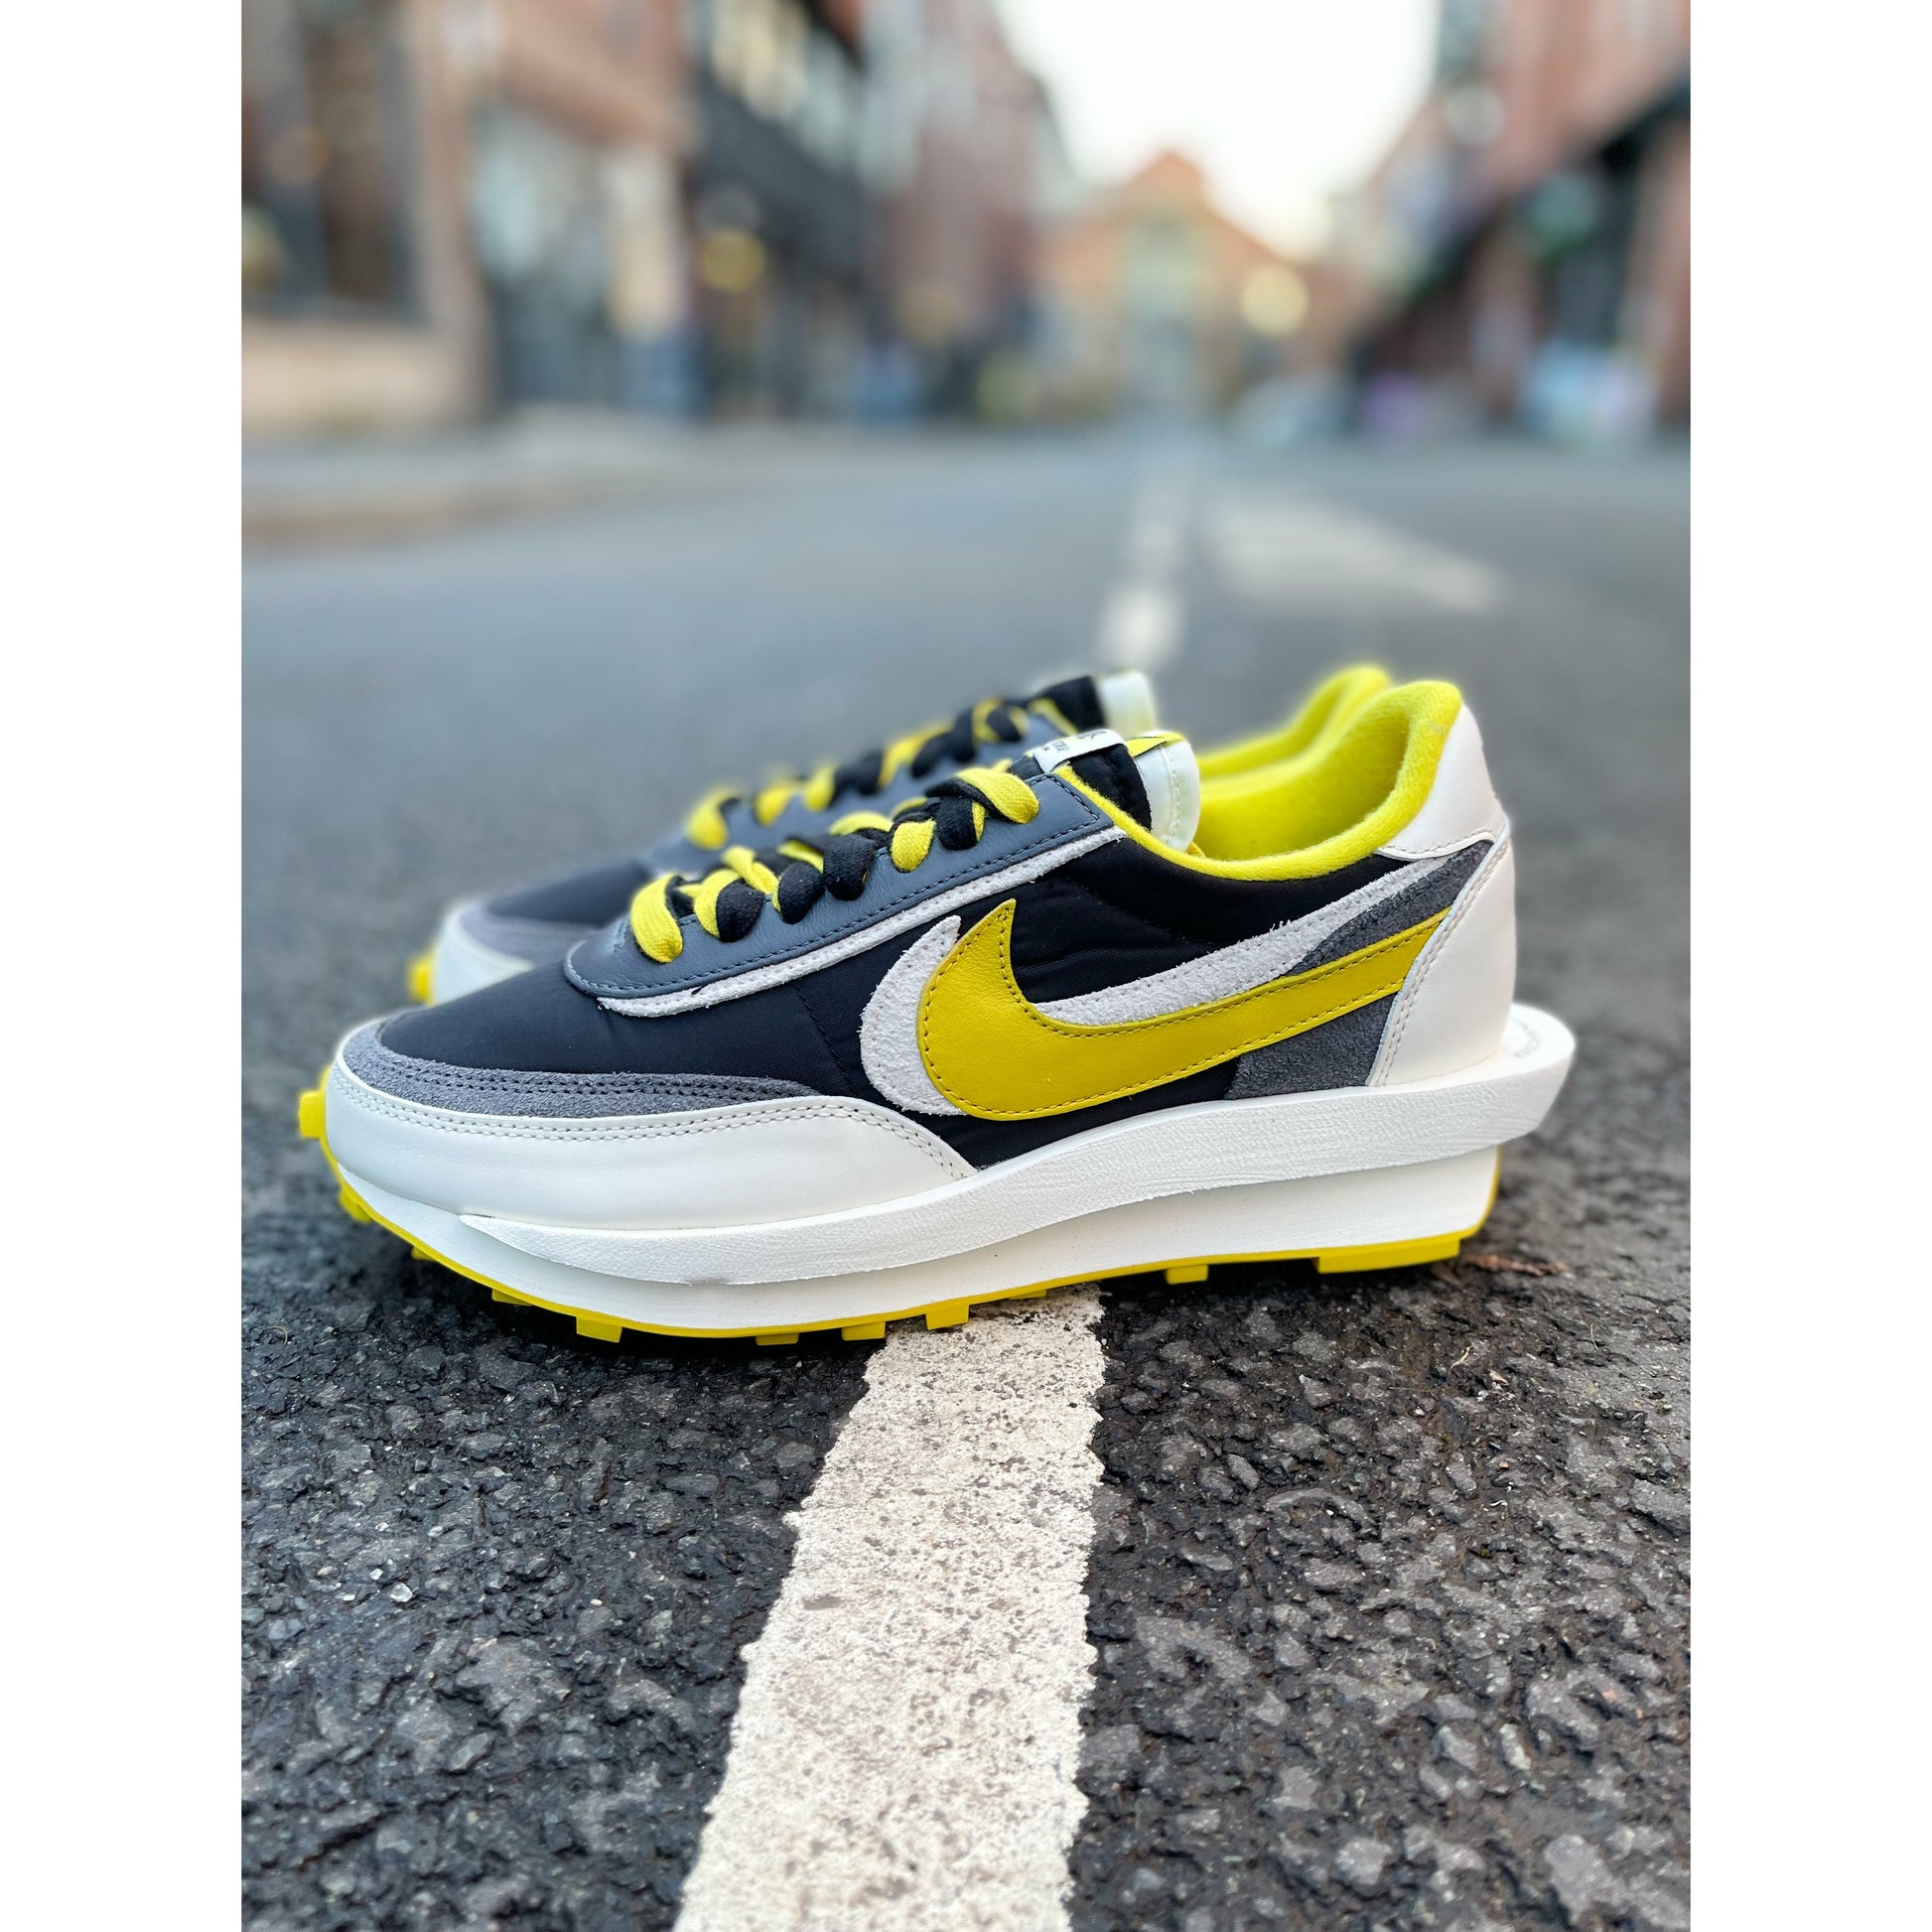 Nike LDWaffle Sacai Undercover Black Bright Citron from Nike